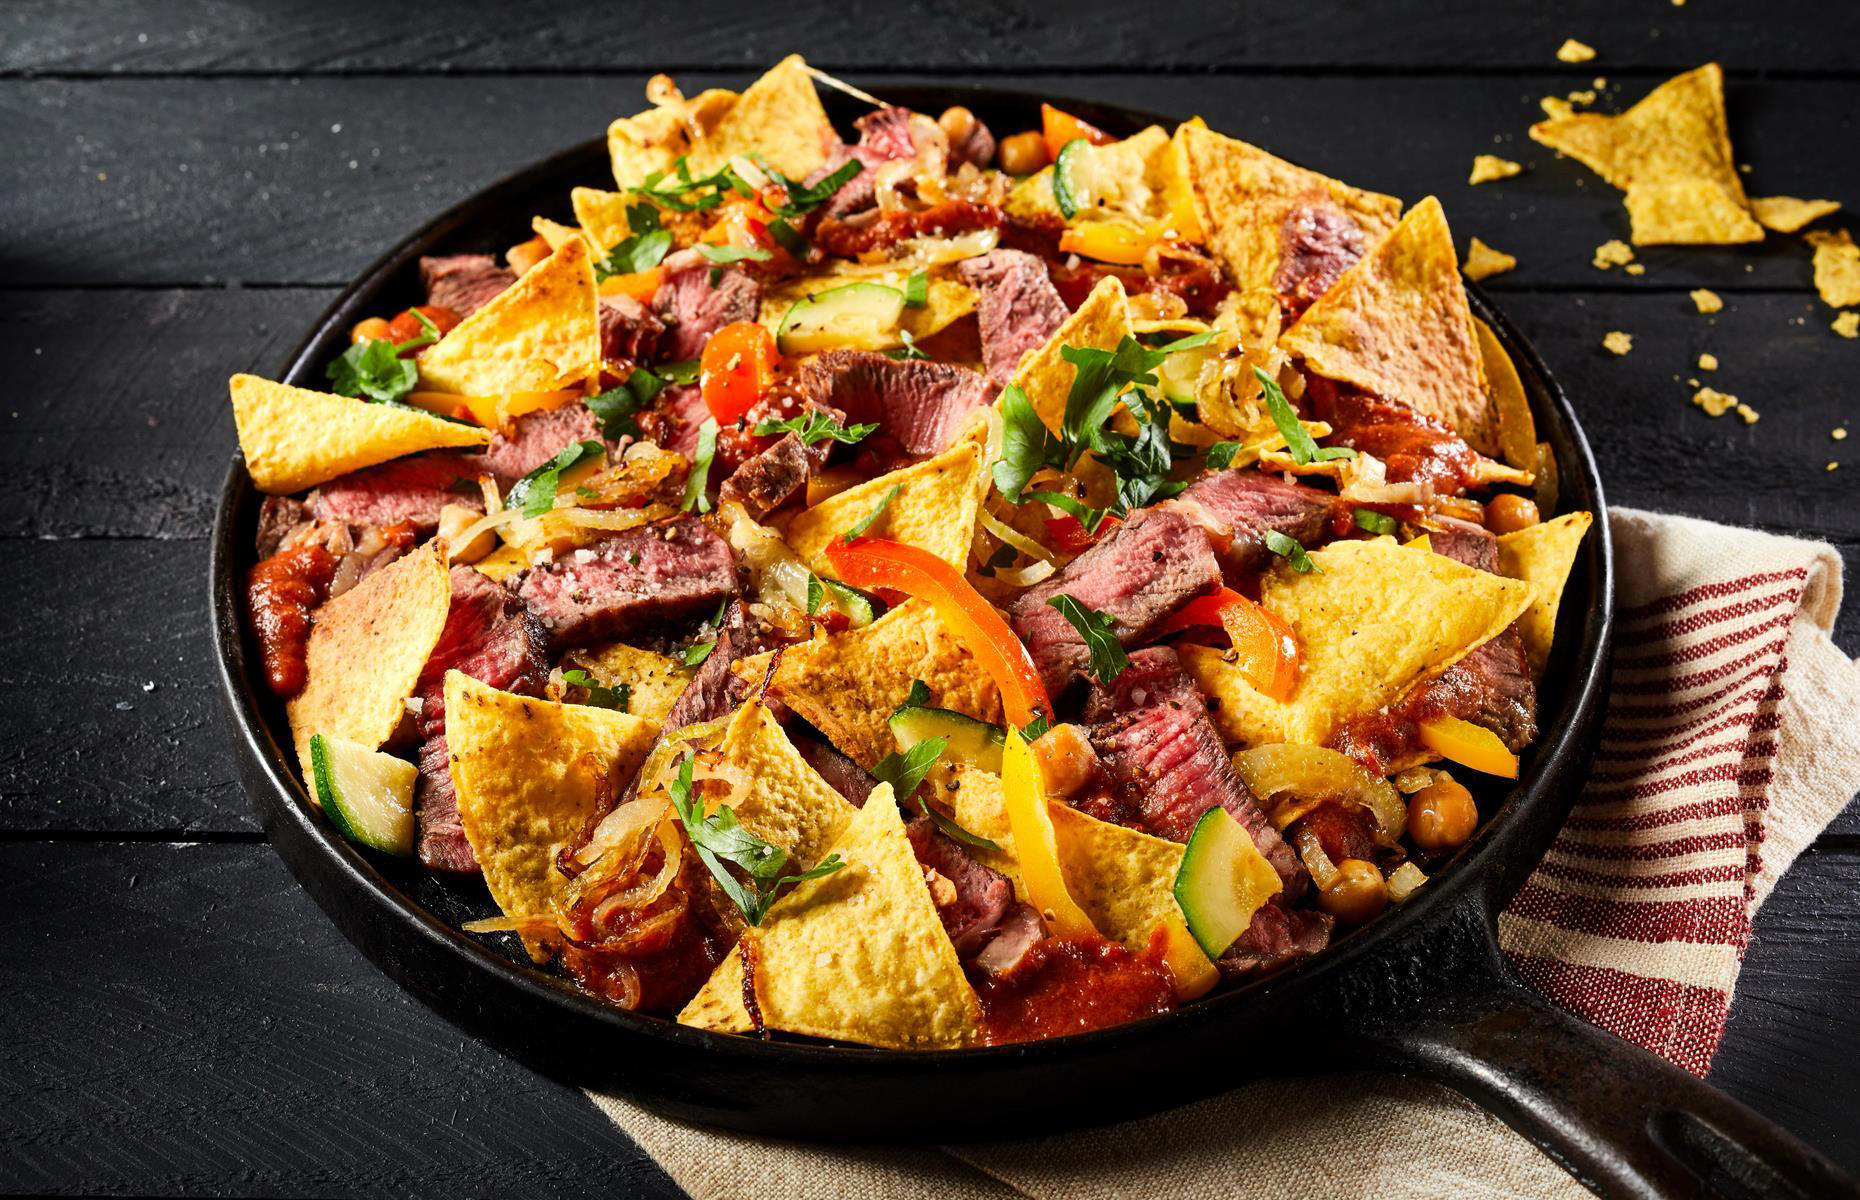 Upgrade your nachos with these tasty toppings